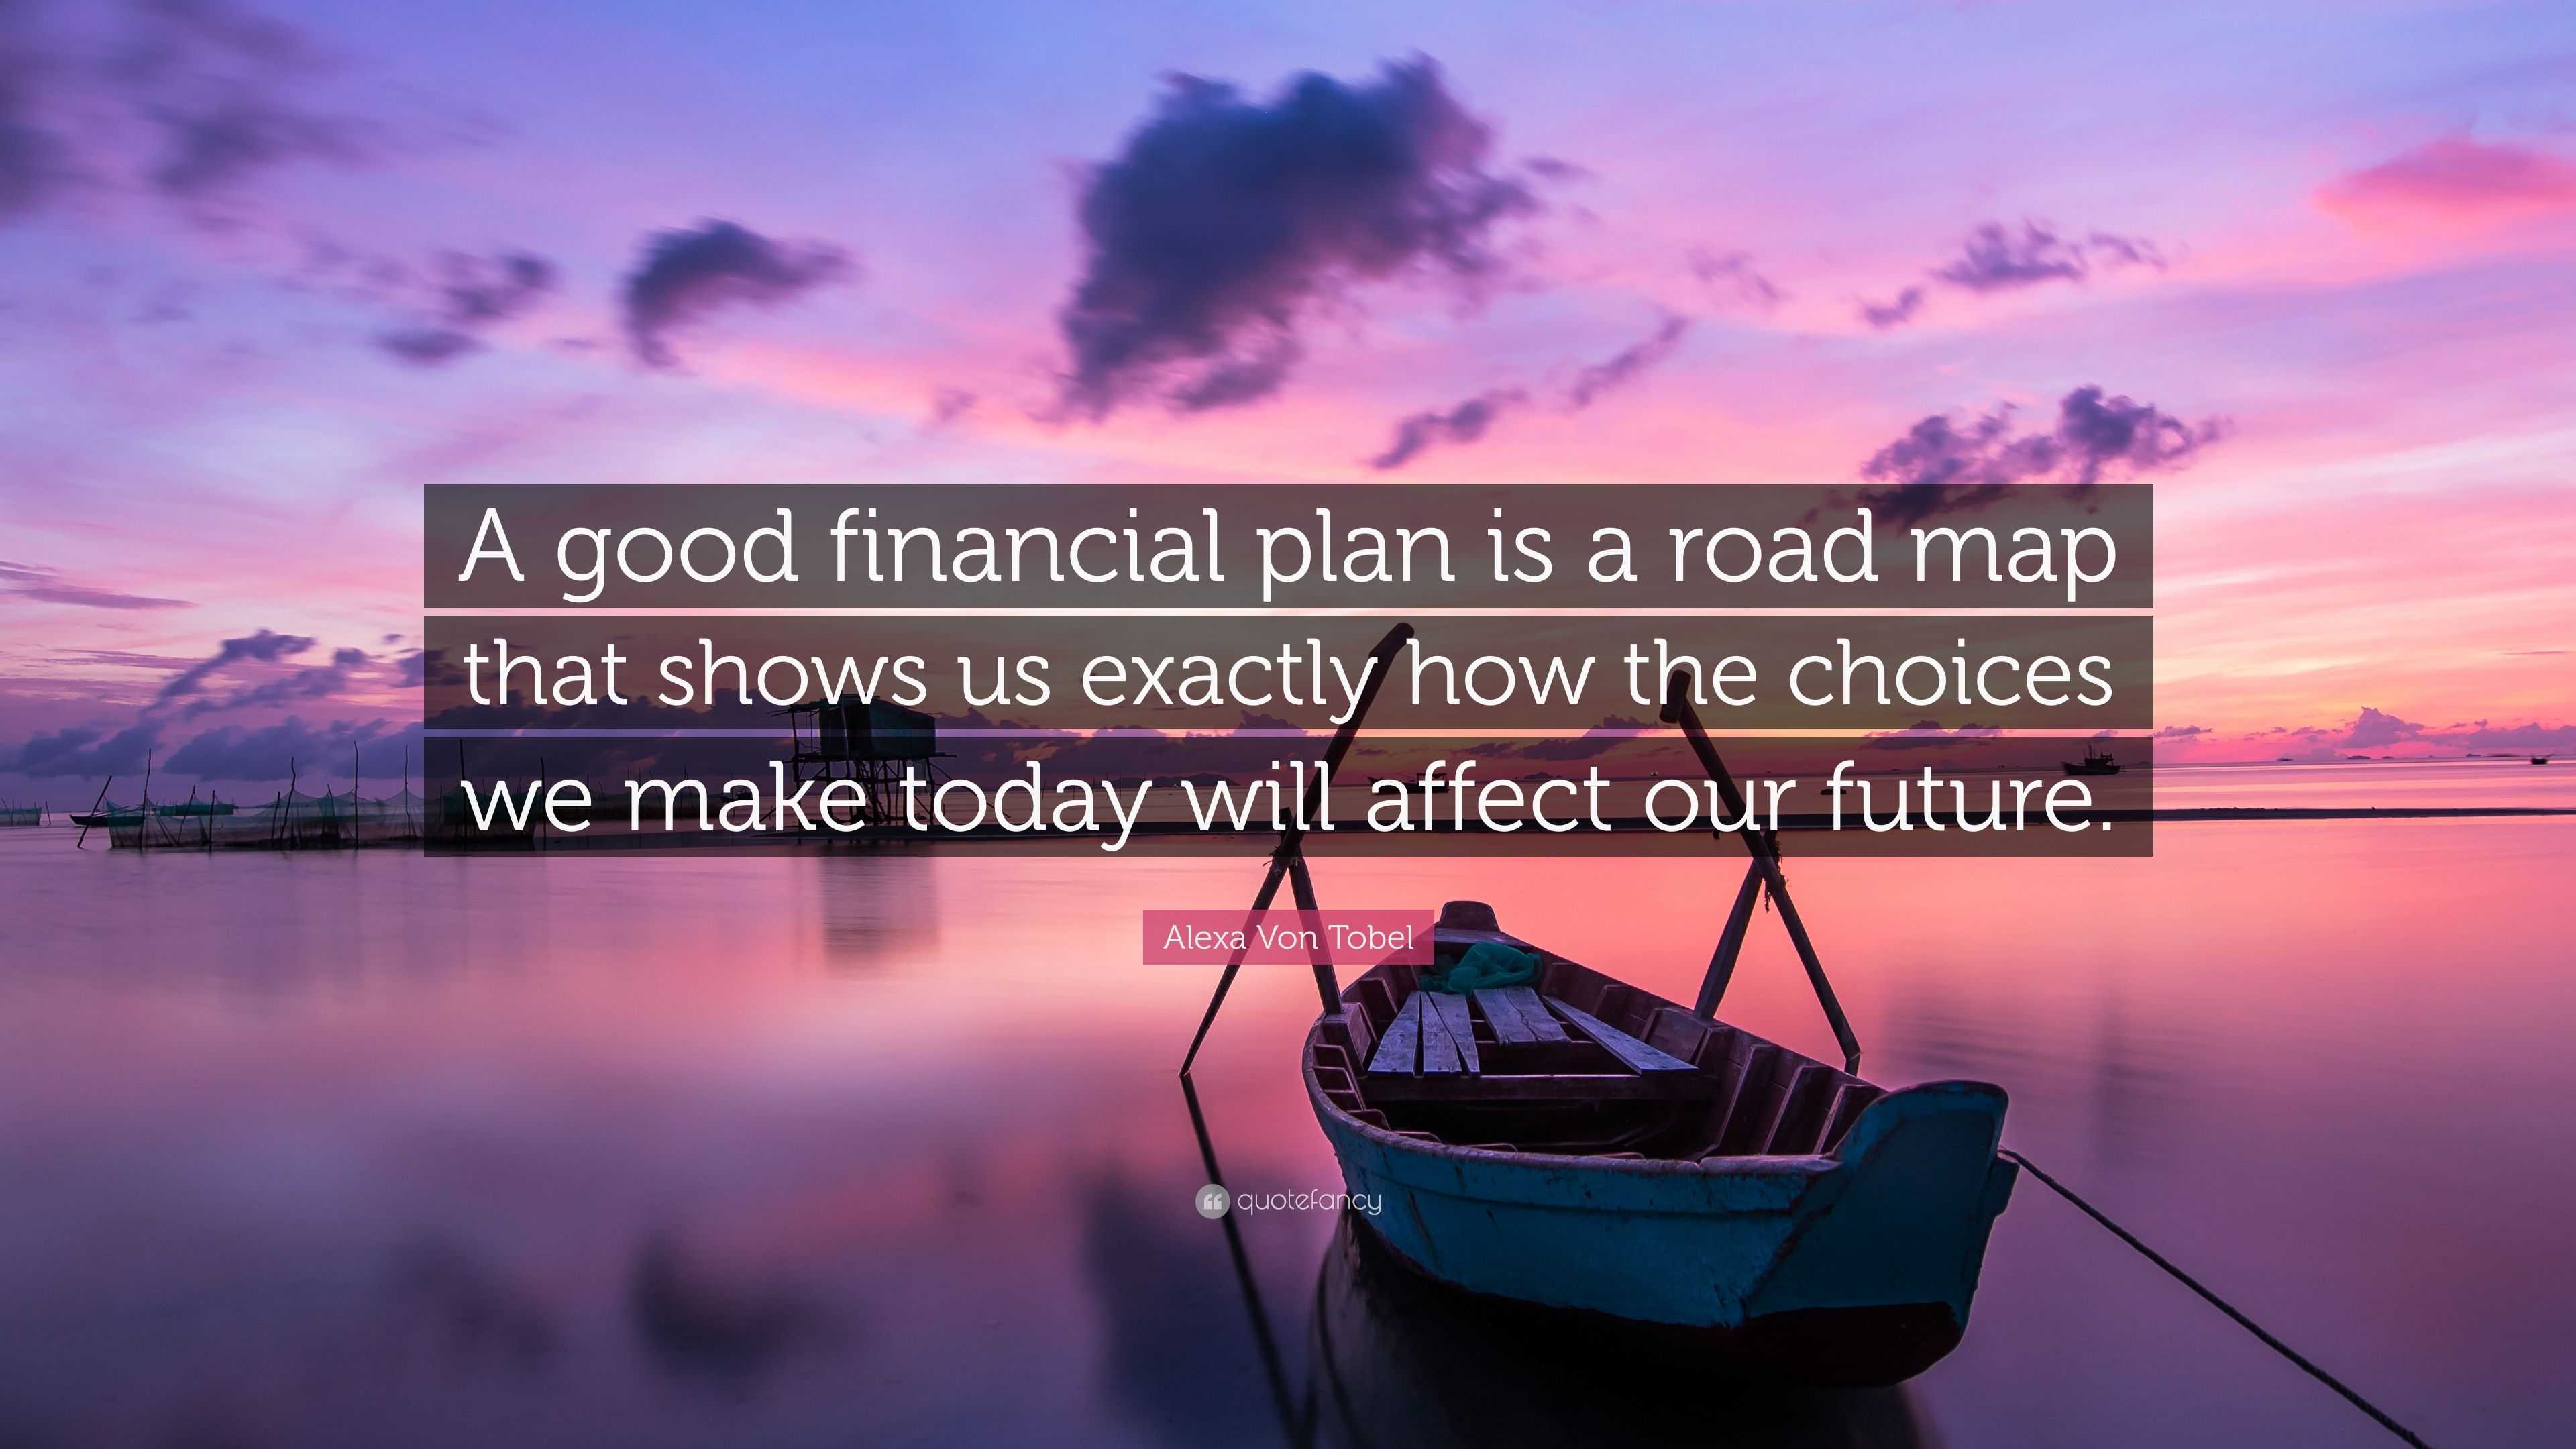 Alexa Von Tobel Quote: “A good financial plan is a road map that shows